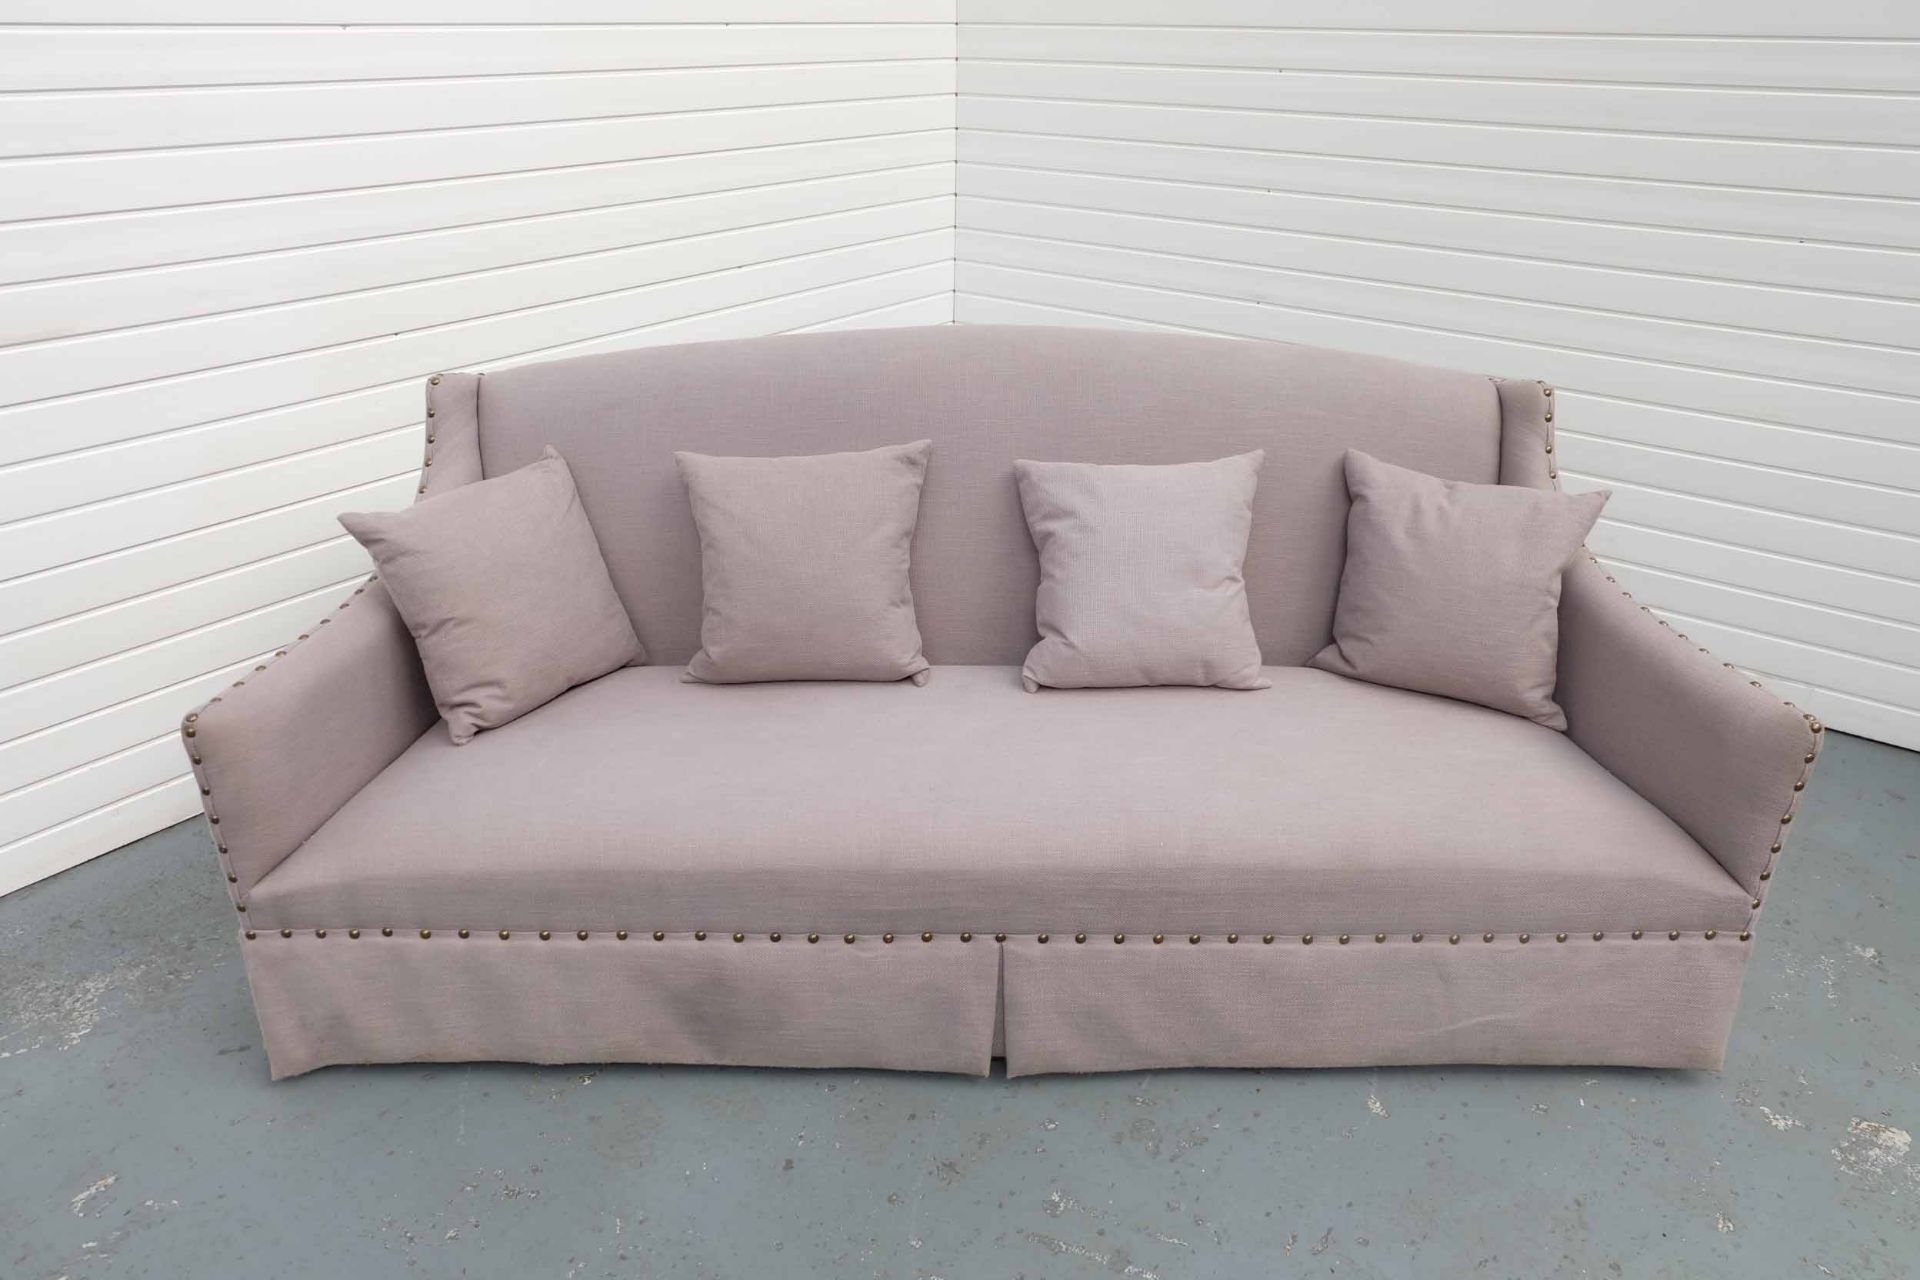 Coach House 3 Seater Sofa. With Valance. Includes 4 Scatter Cushions.